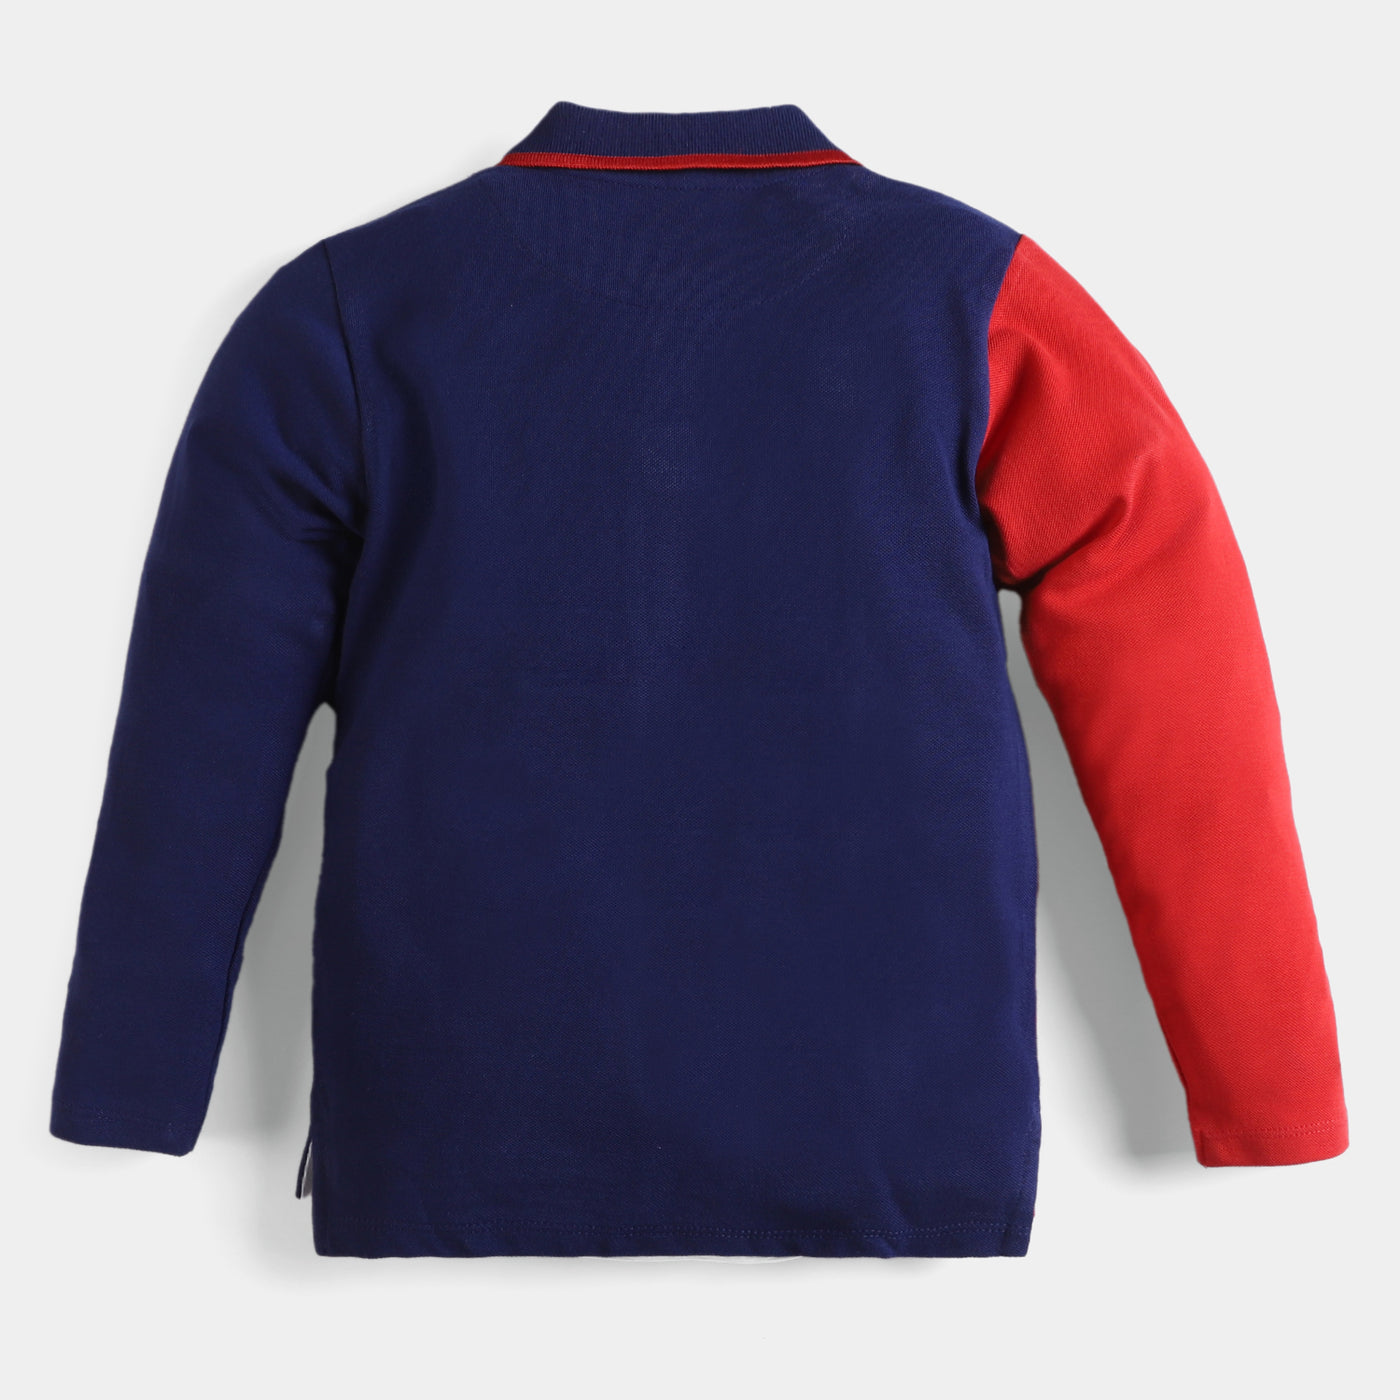 Boys Cotton Polo T-Shirt Connected - Red/Navy